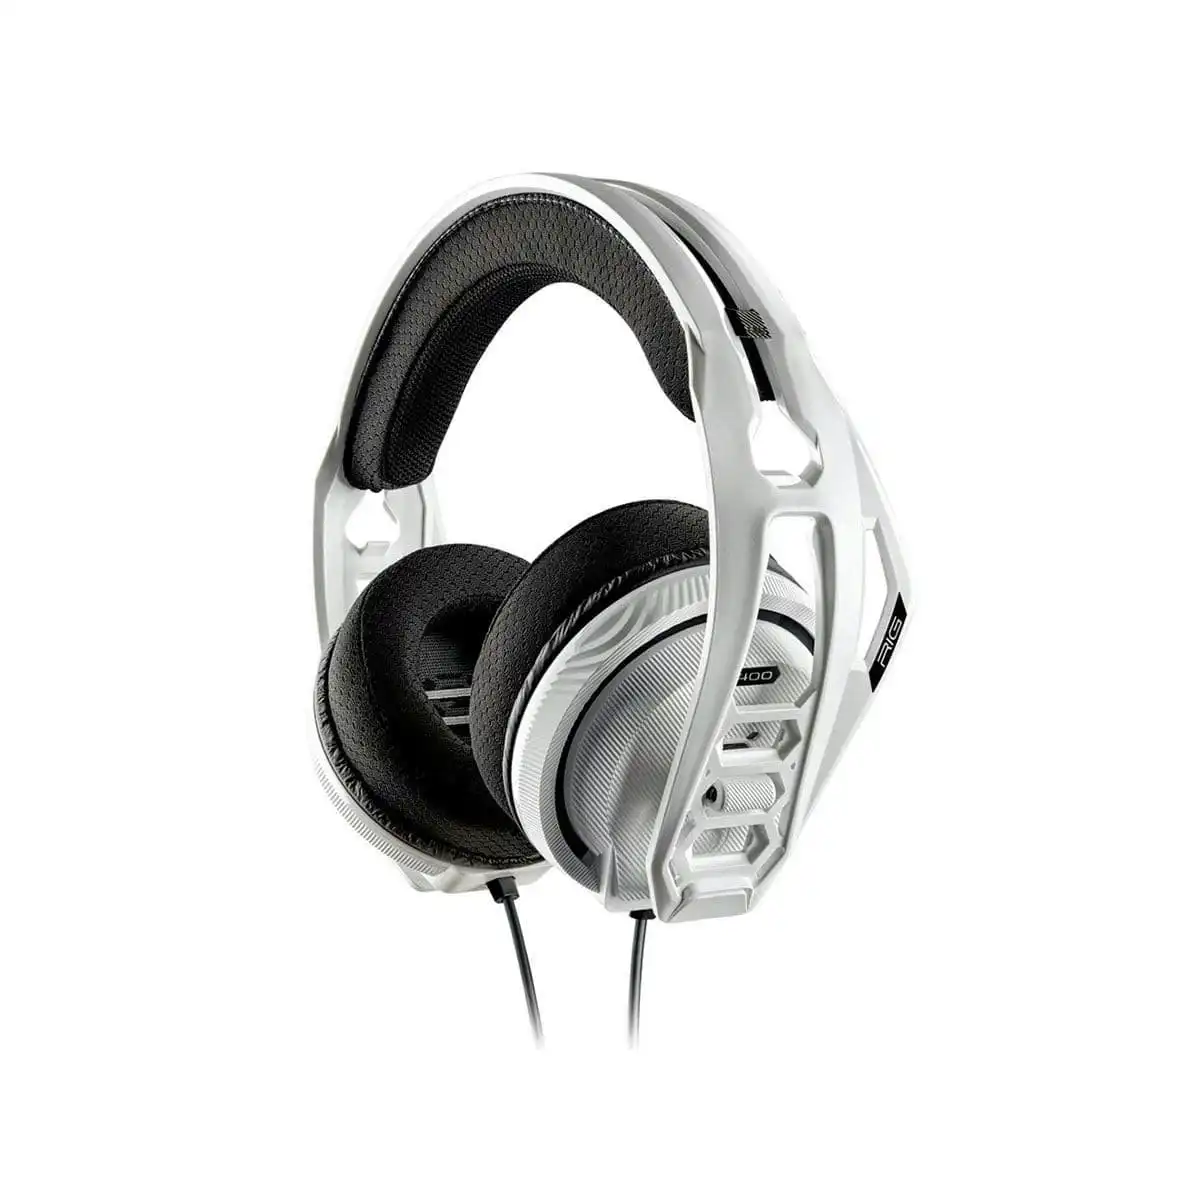 RIG 400 HX White V2 Gaming Headset For Xbox Series X|S and Xbox One